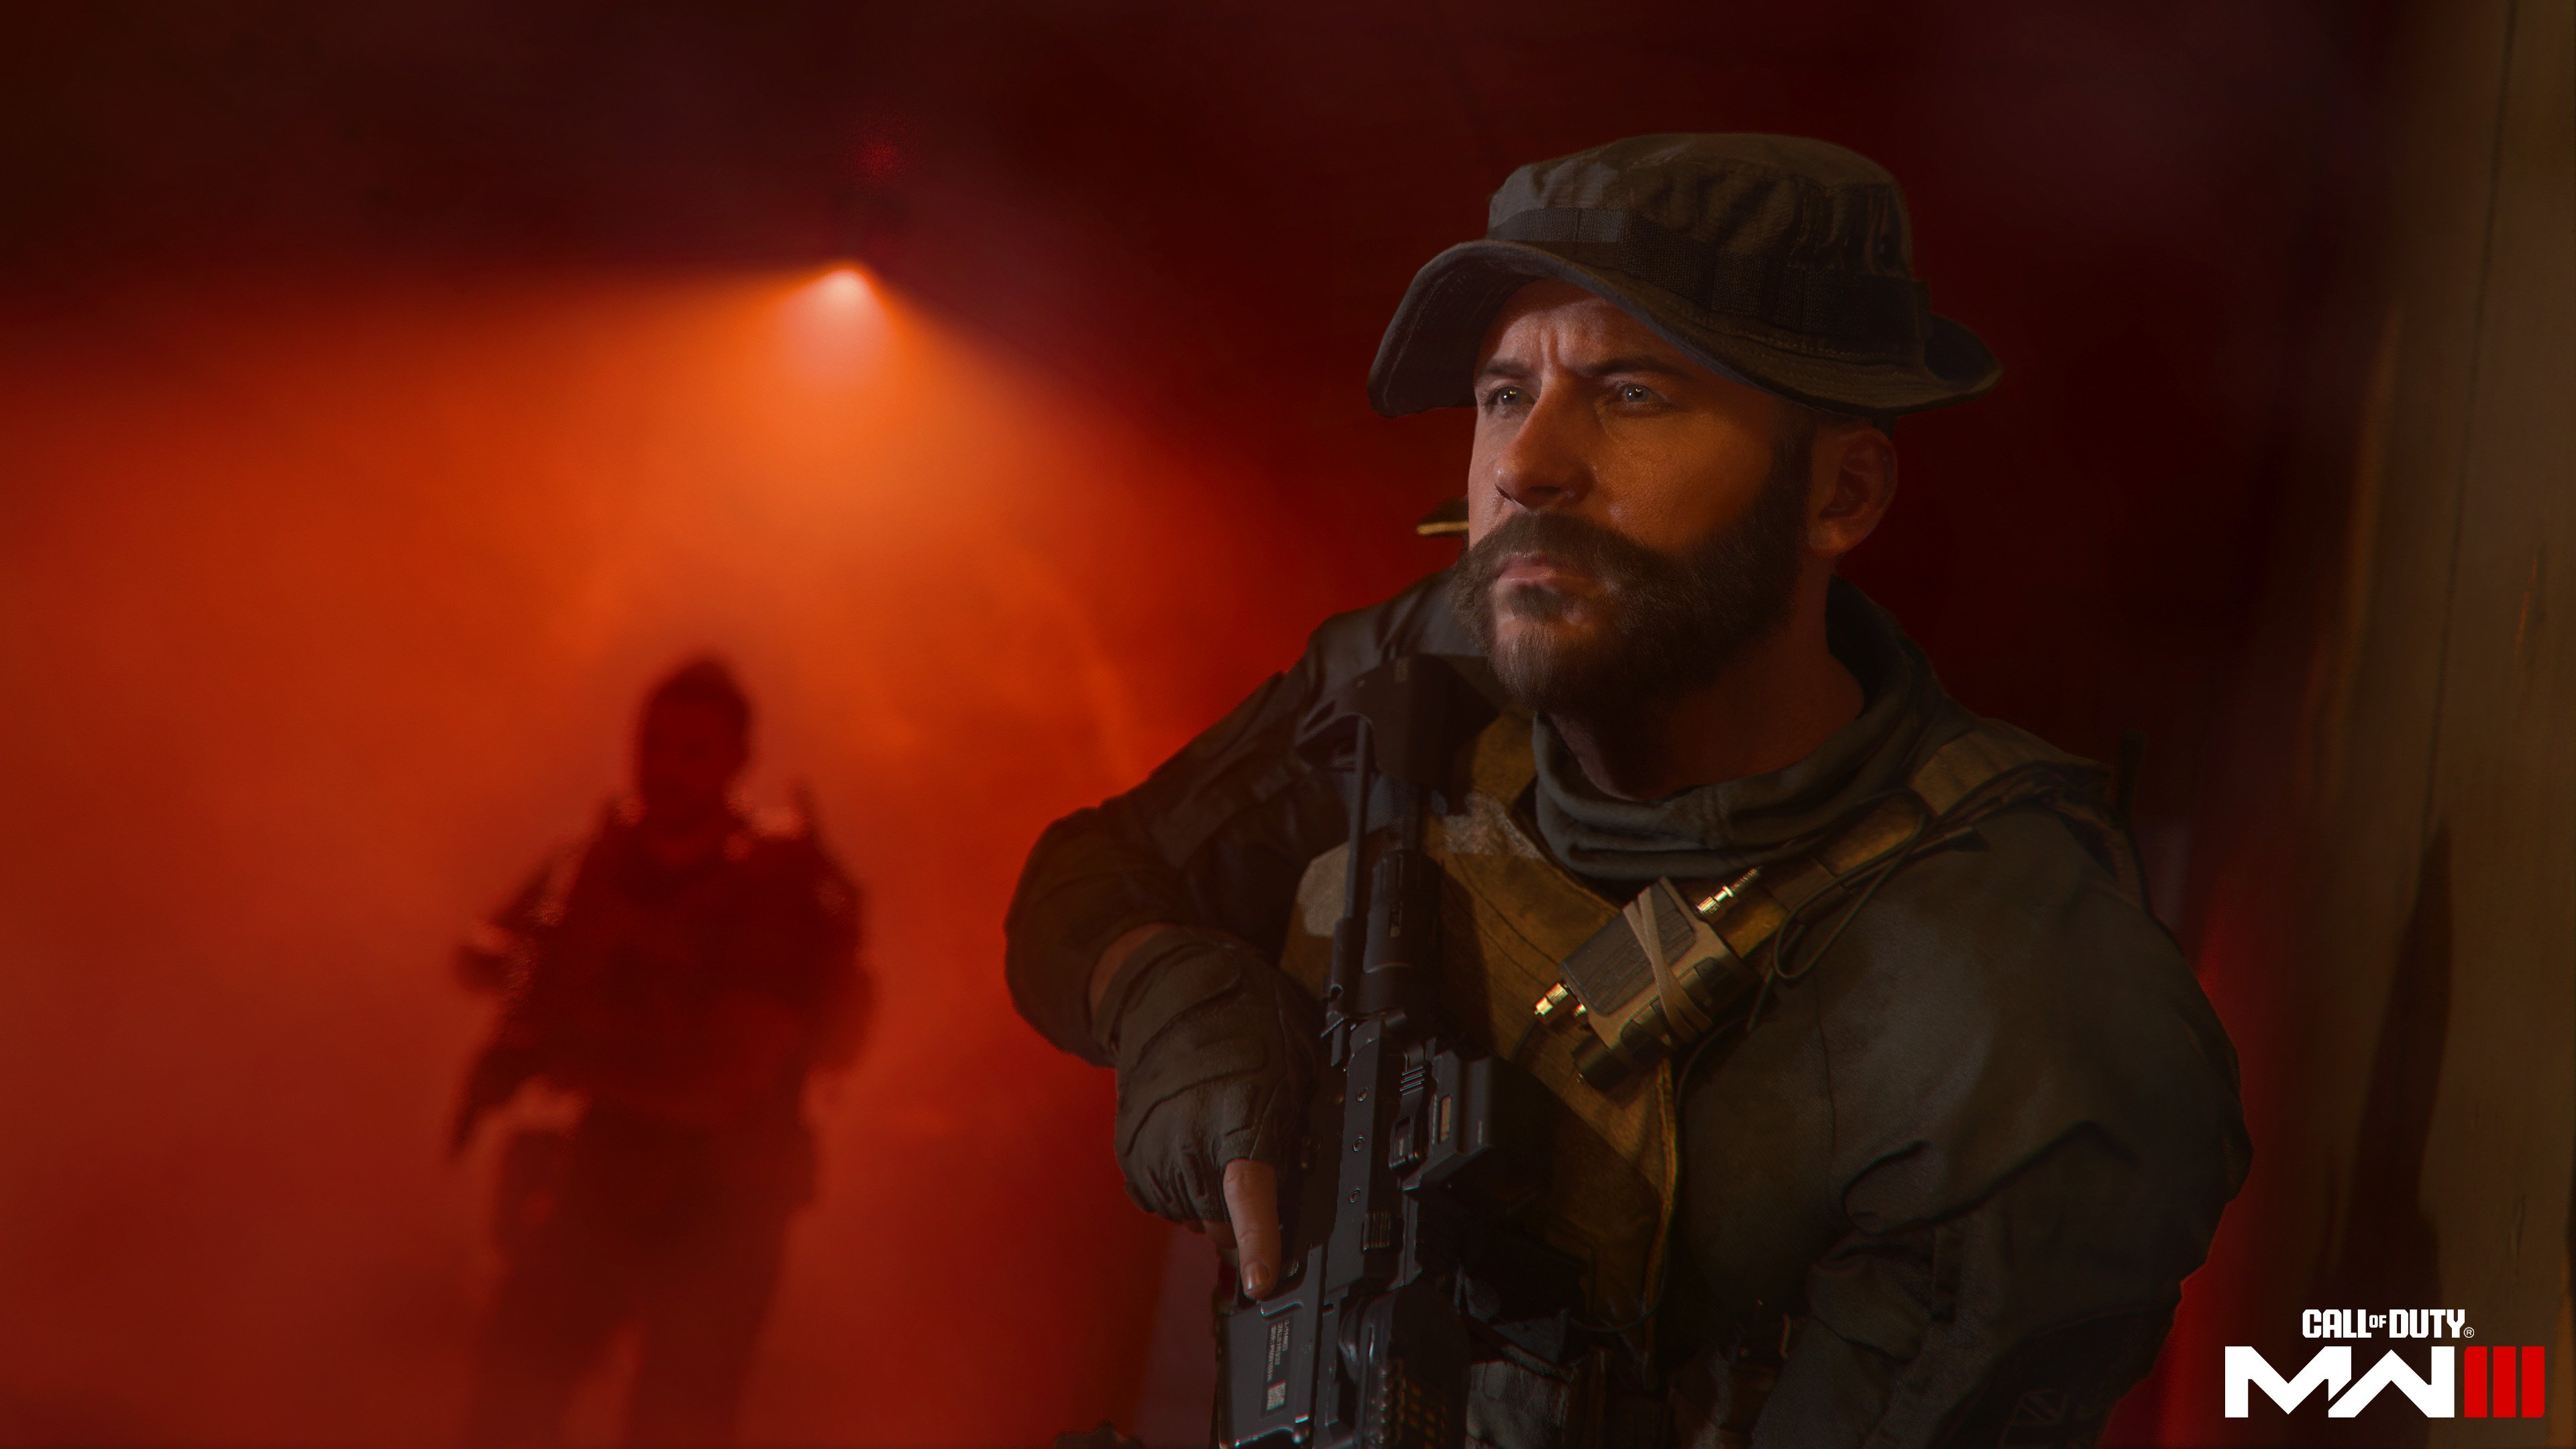 NEWS: Ranked play developed by Treyarch is coming to MWII in 2023